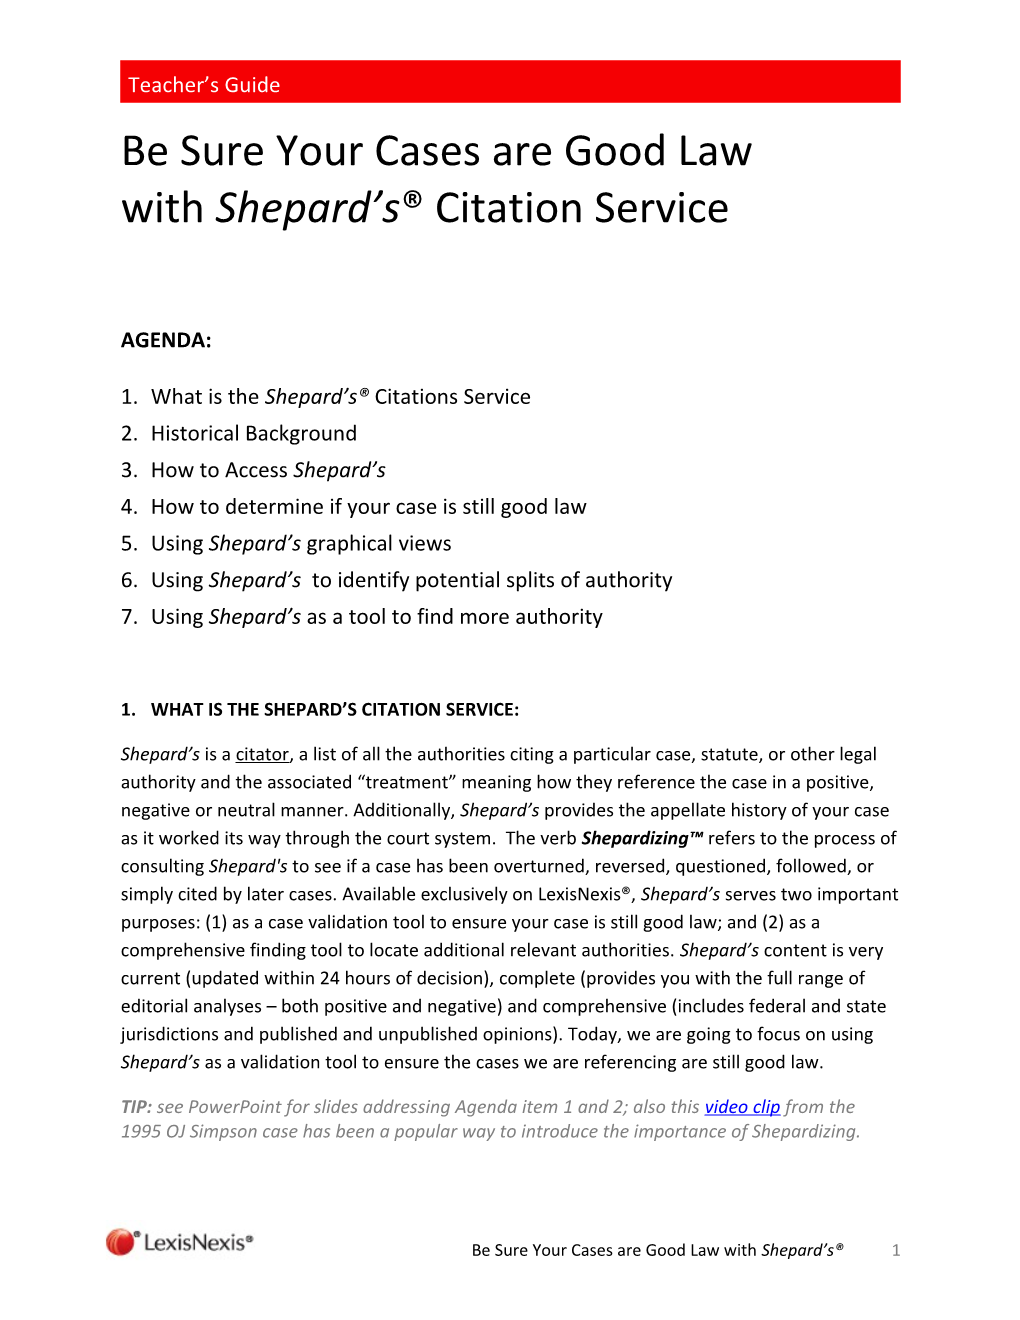 1. What Is the Shepard S Citations Service